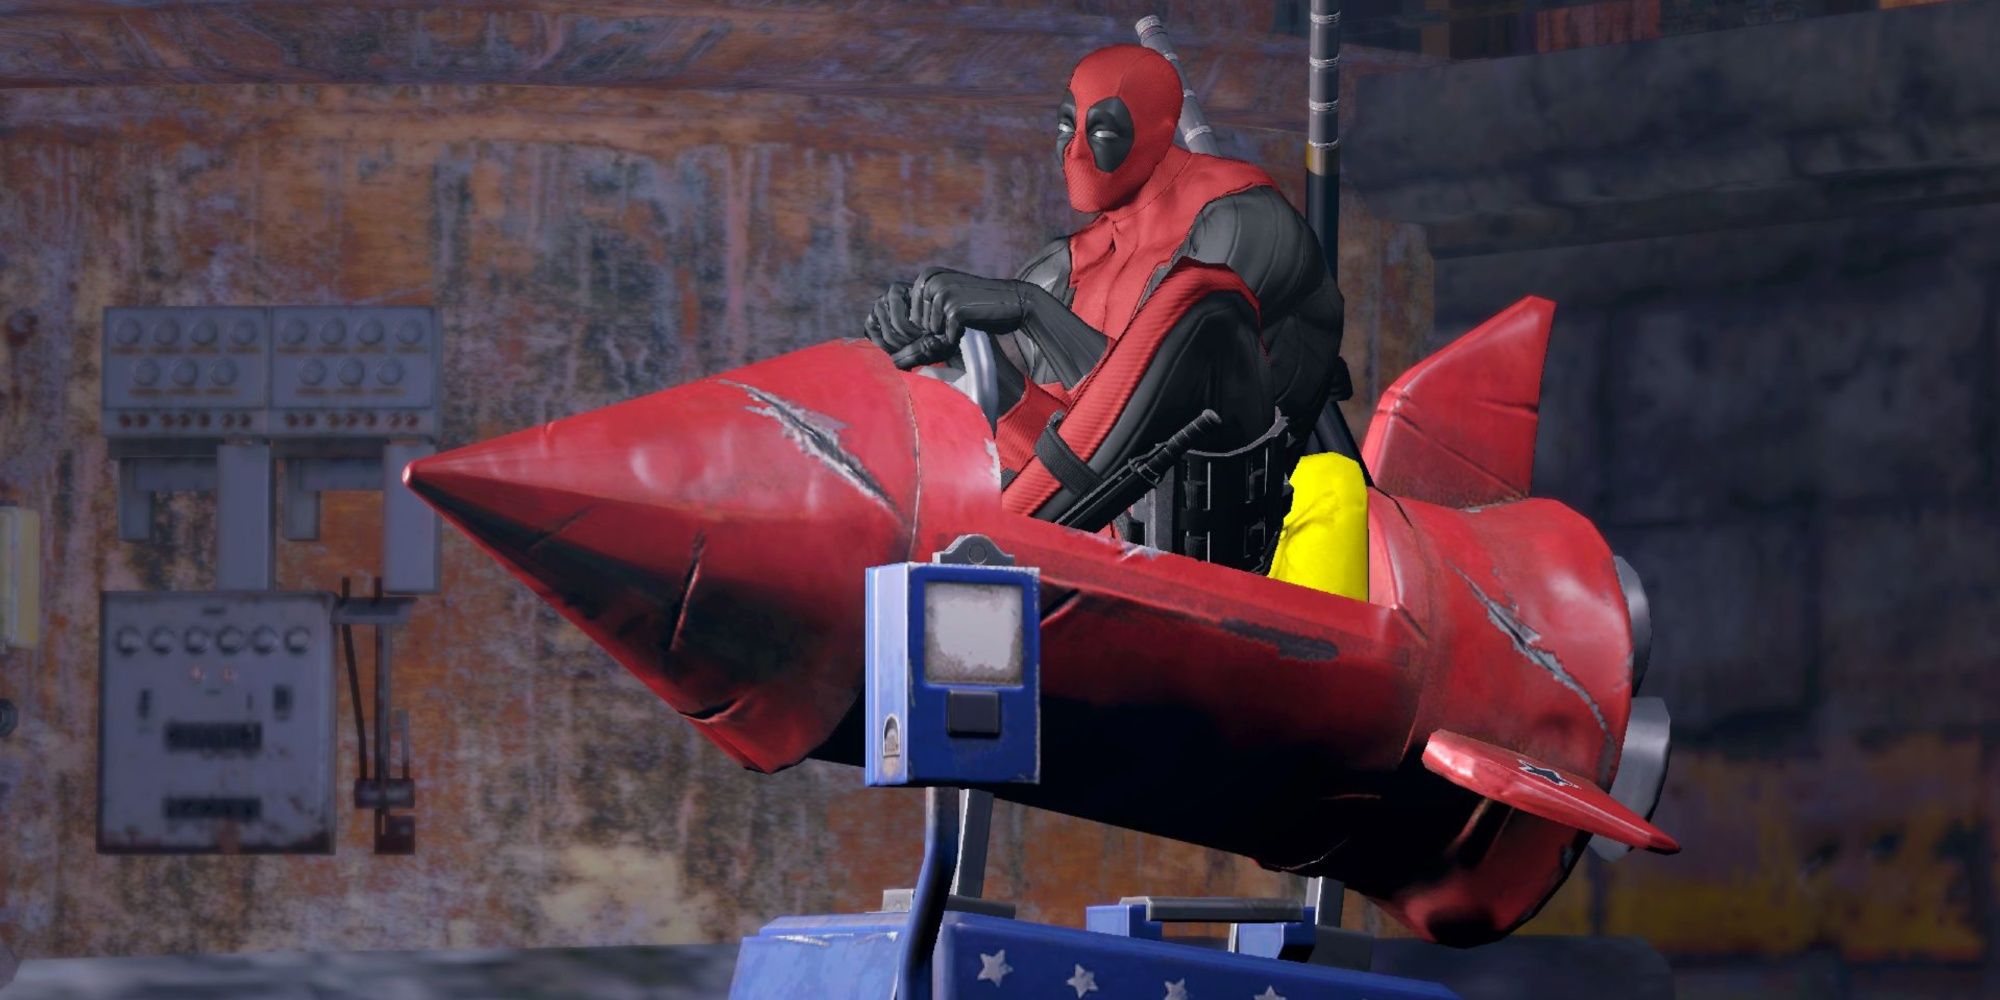 Deadpool on a small ride in his game.